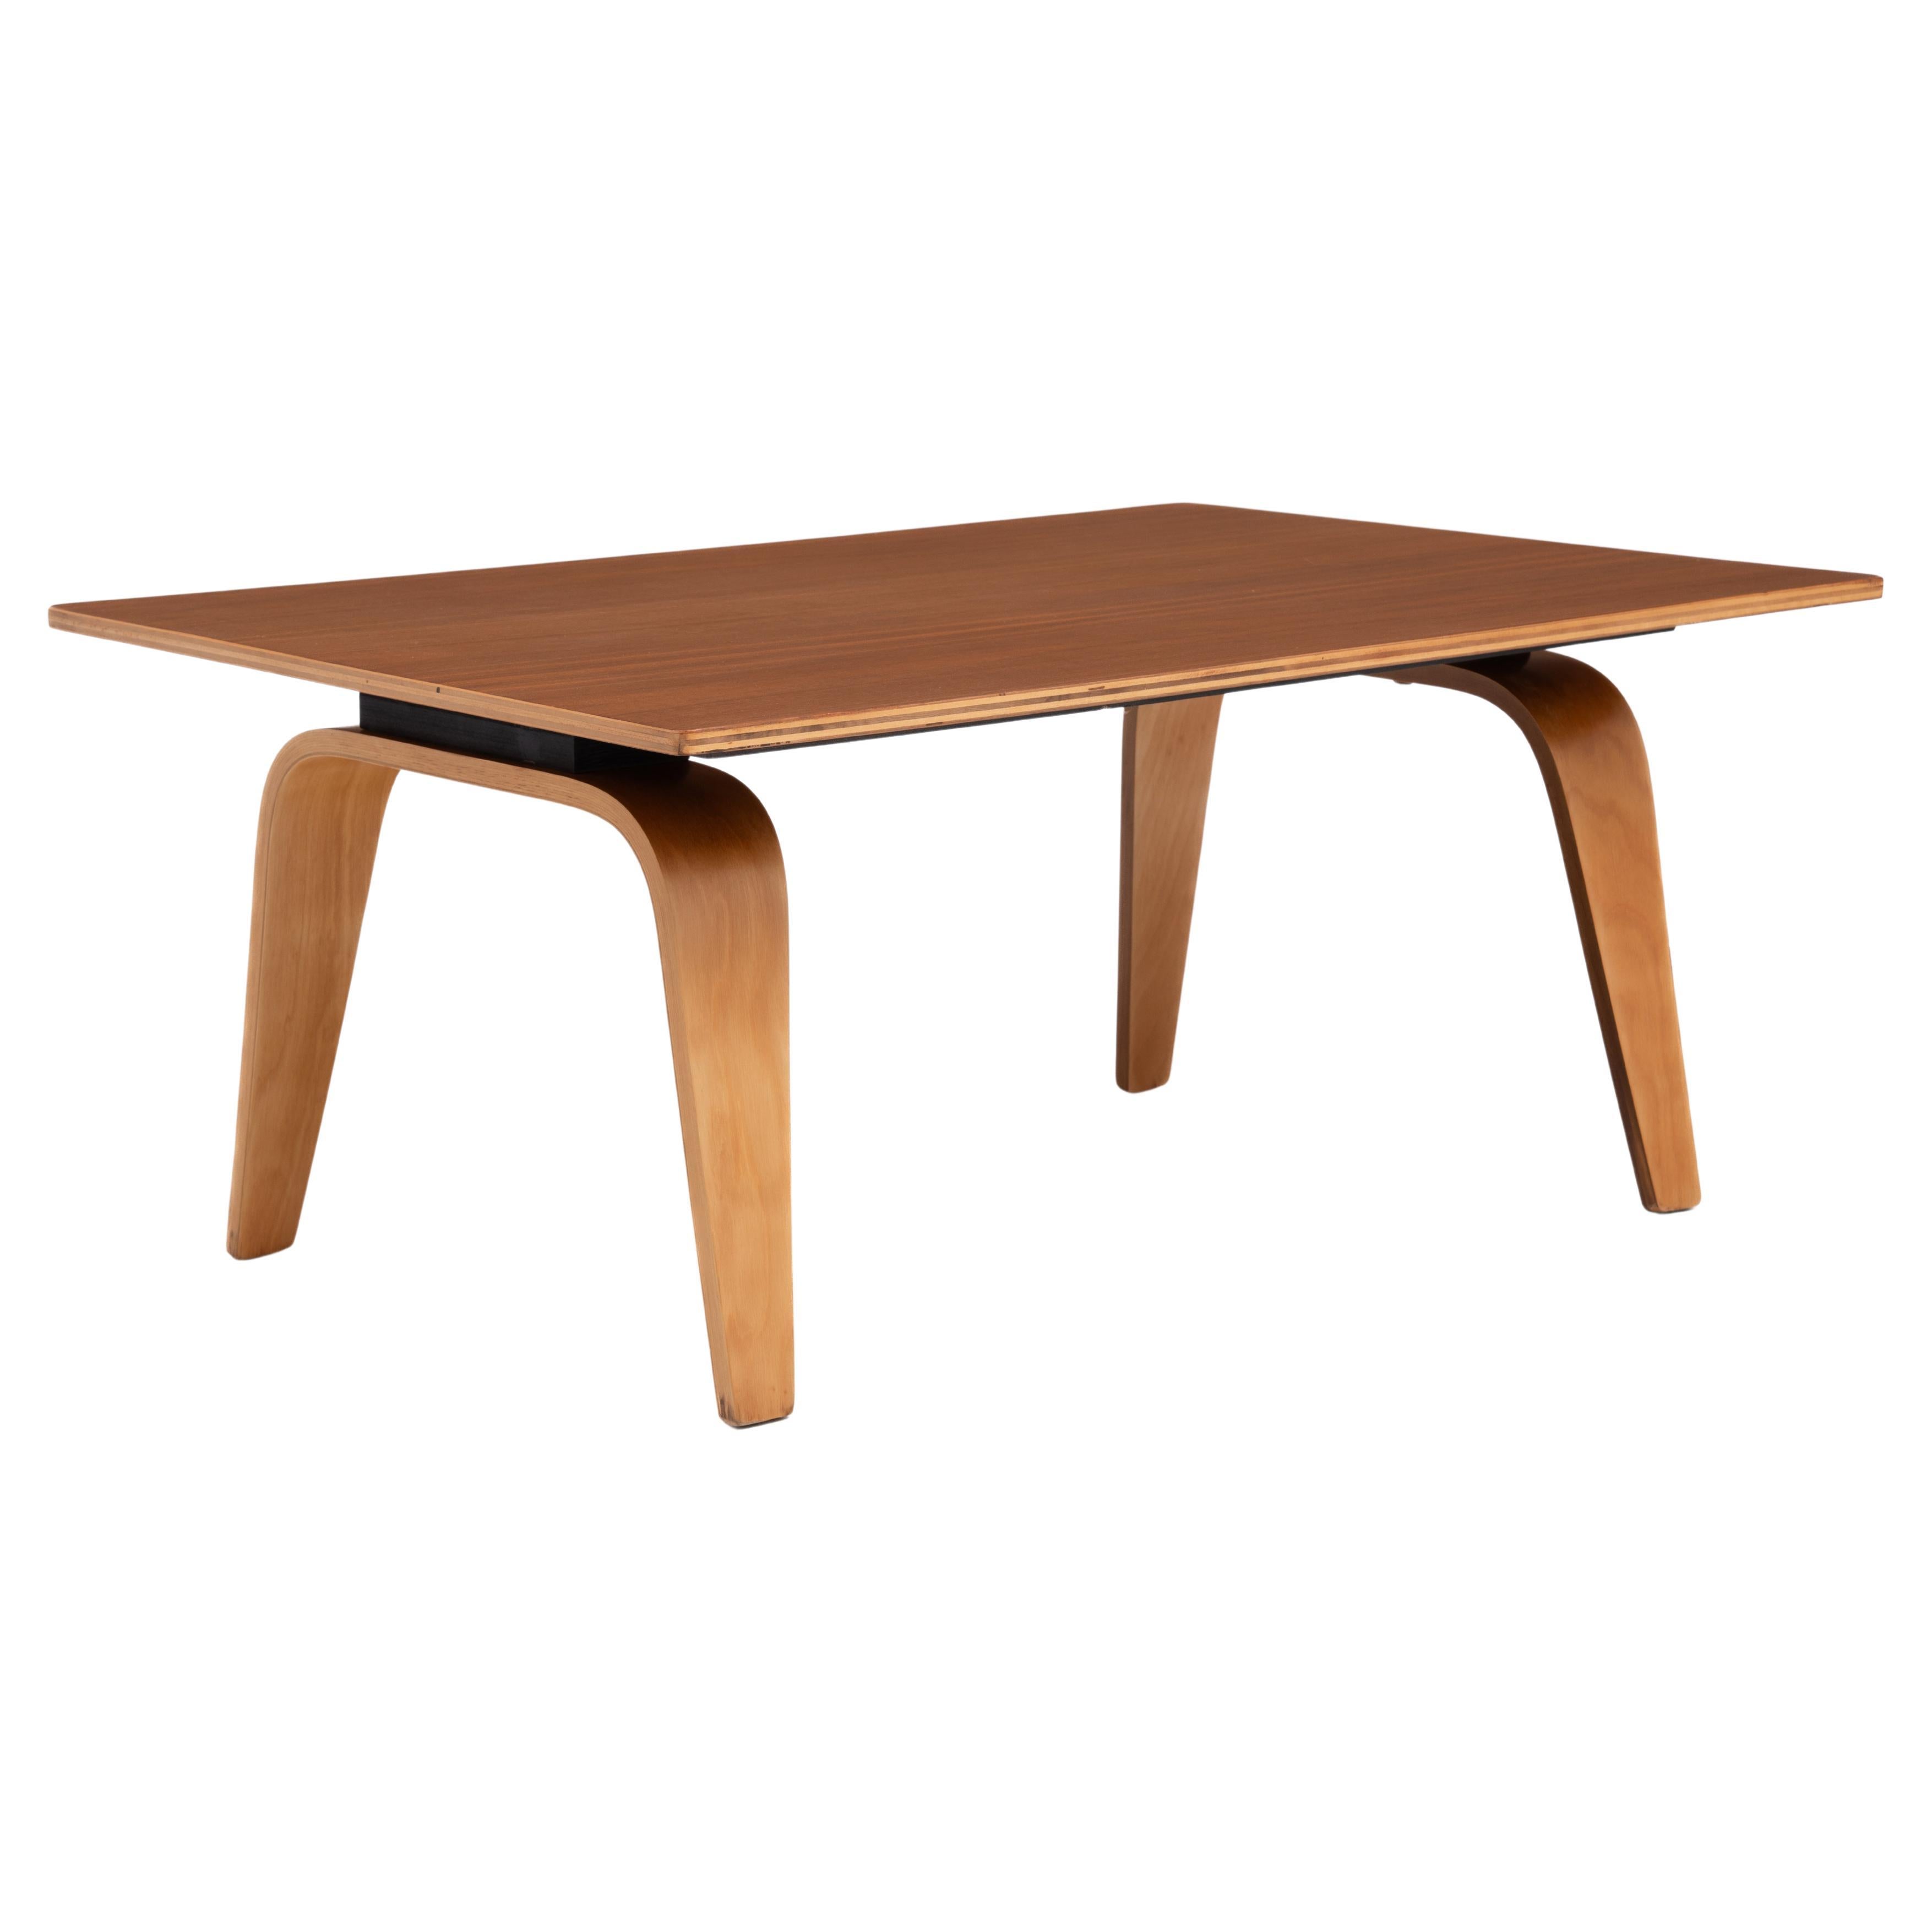 Charles Ray Eames Evans Plywood Company CTW1 OTW Oblong Table Wood Walnut Birch For Sale